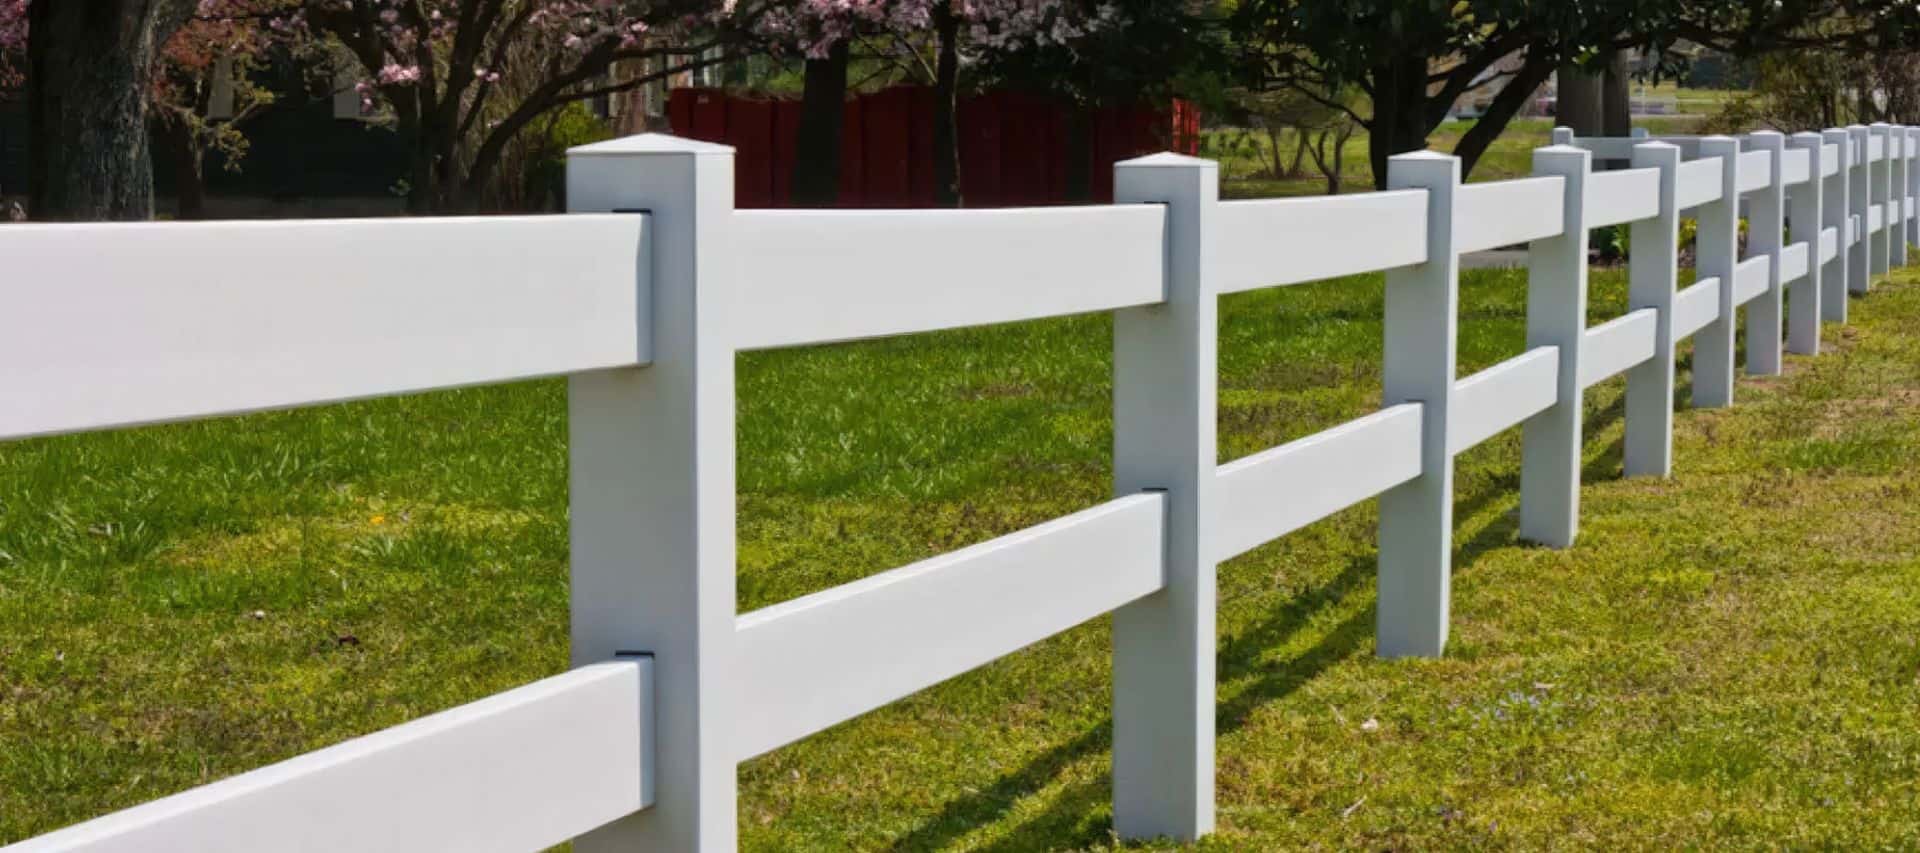 Vinyl 2-rail ranch fence in urban setting. Open field with grassy lawn, trees in the background. Serene and secure landscape.